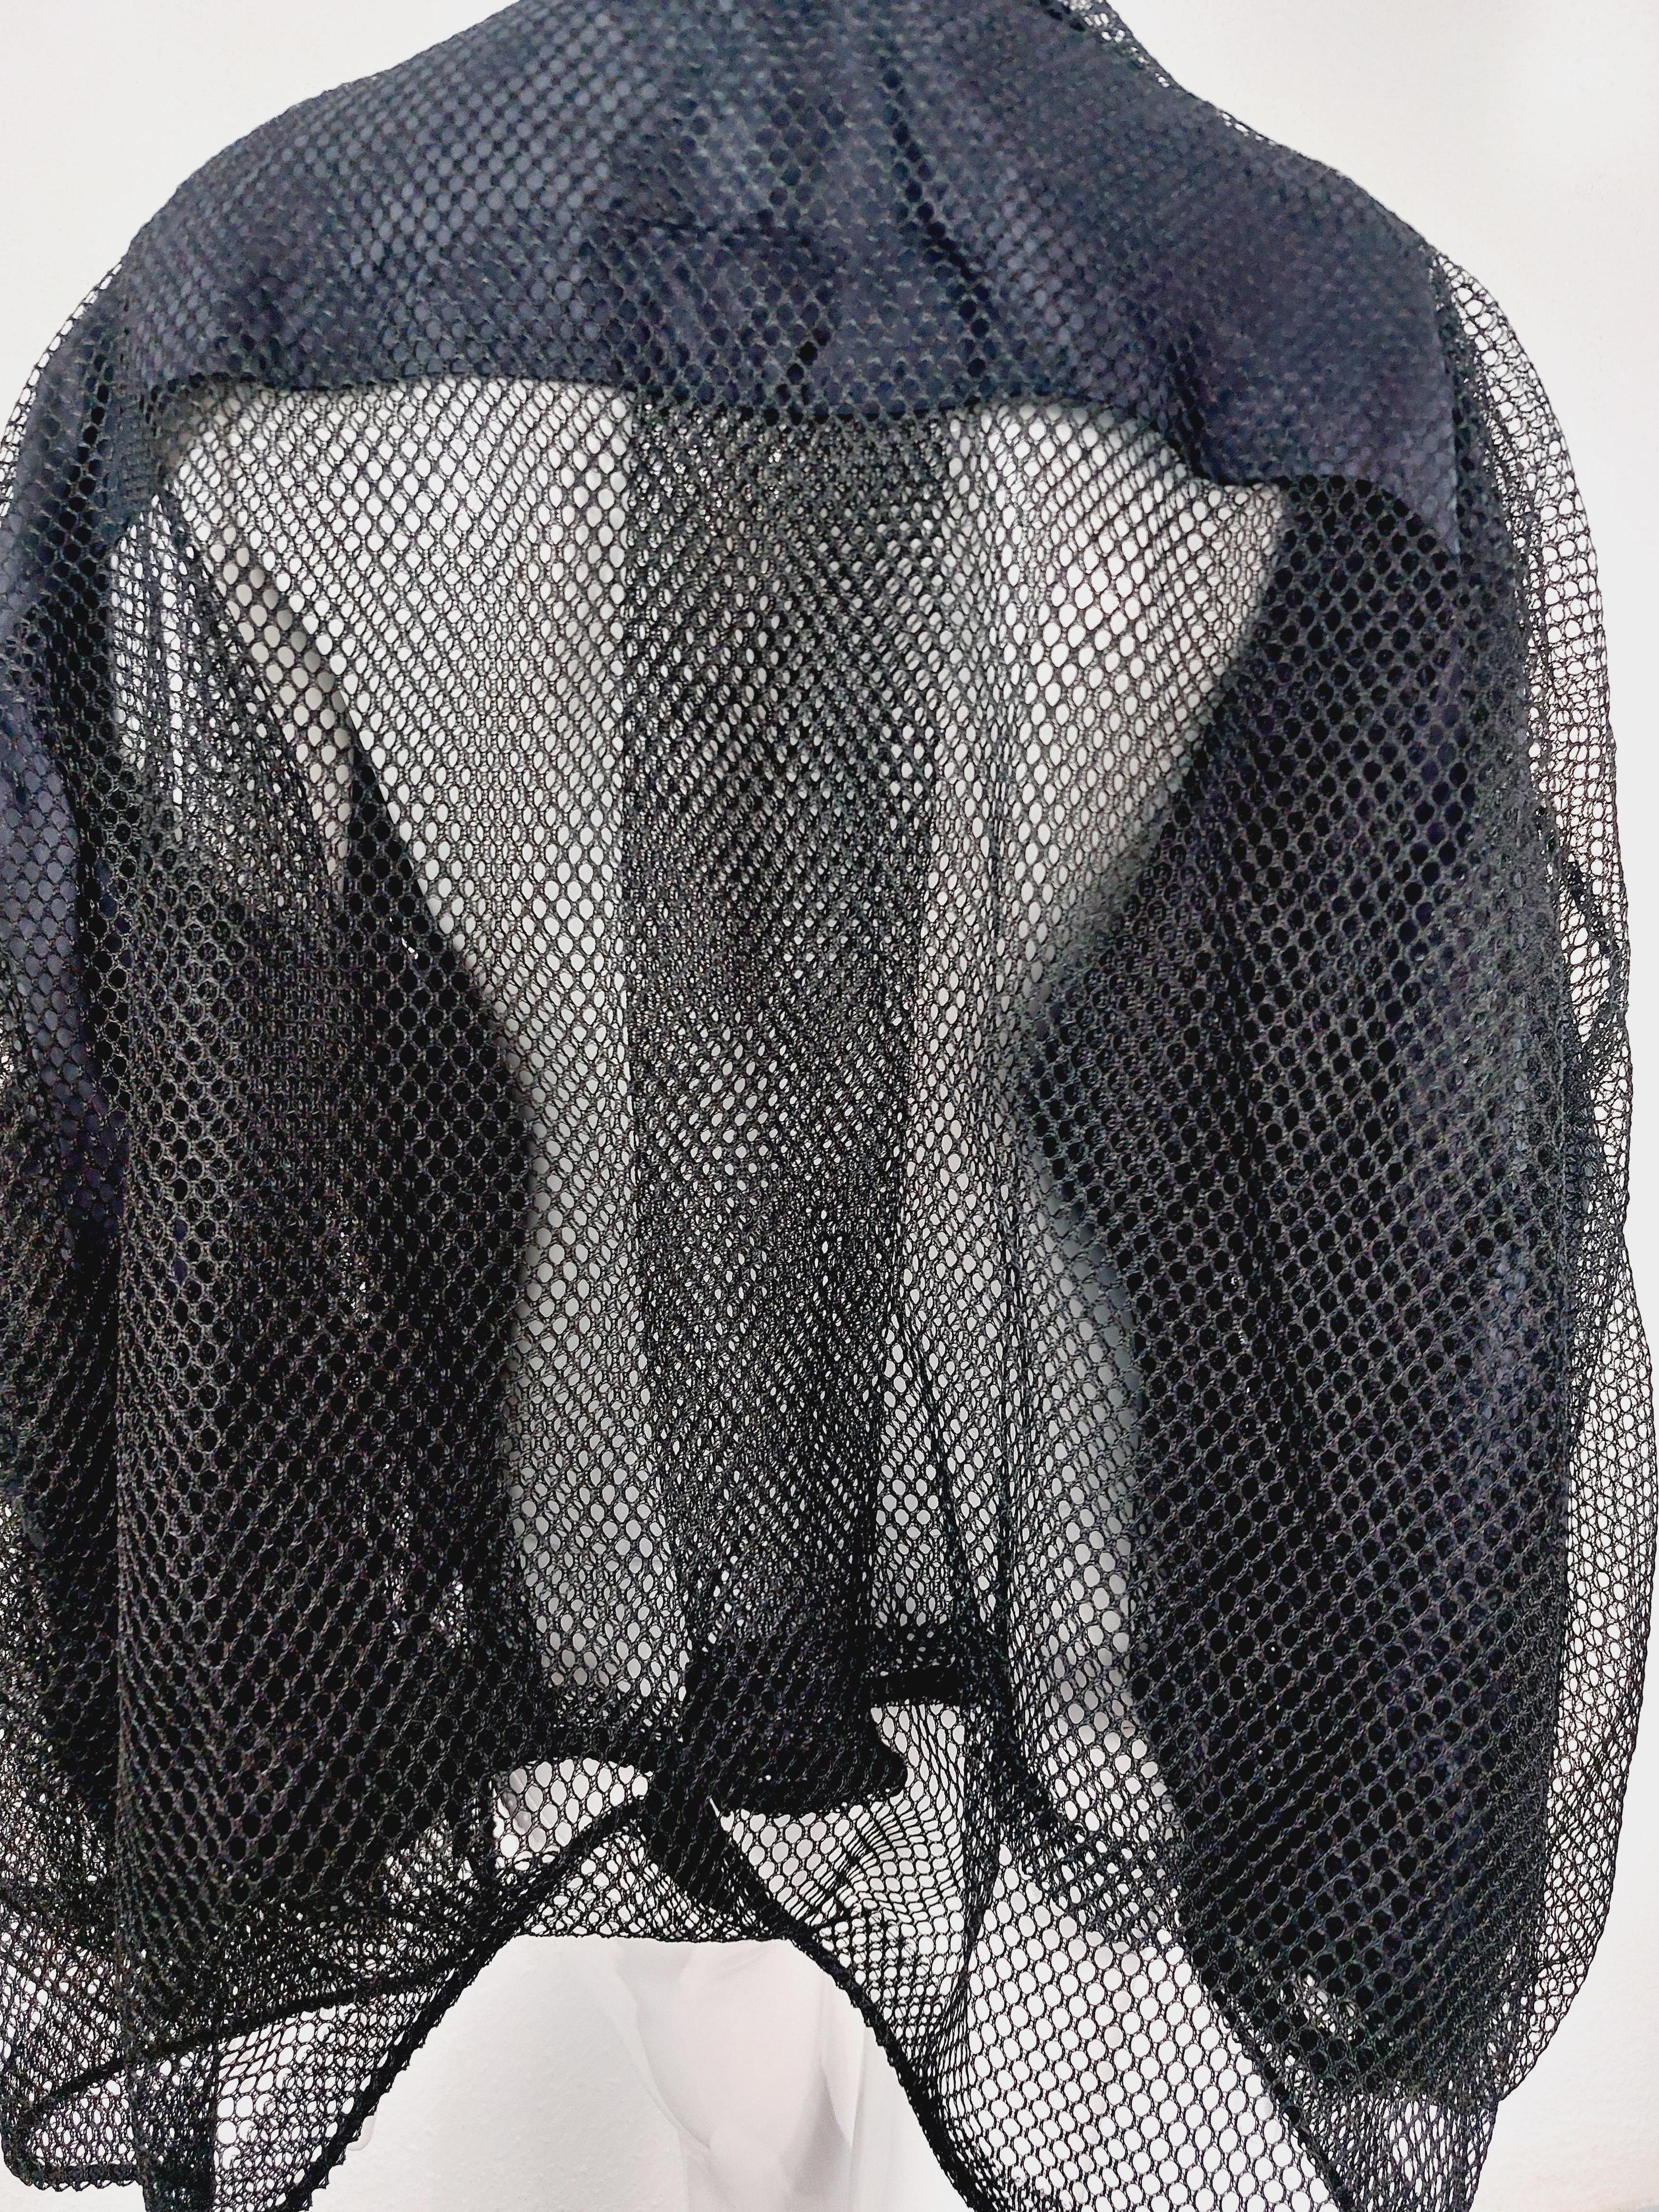 SS 1992 Runway Issey Miyake Double Layered Mesh Fishnet Net Tactical Nylon Cargo For Sale 7